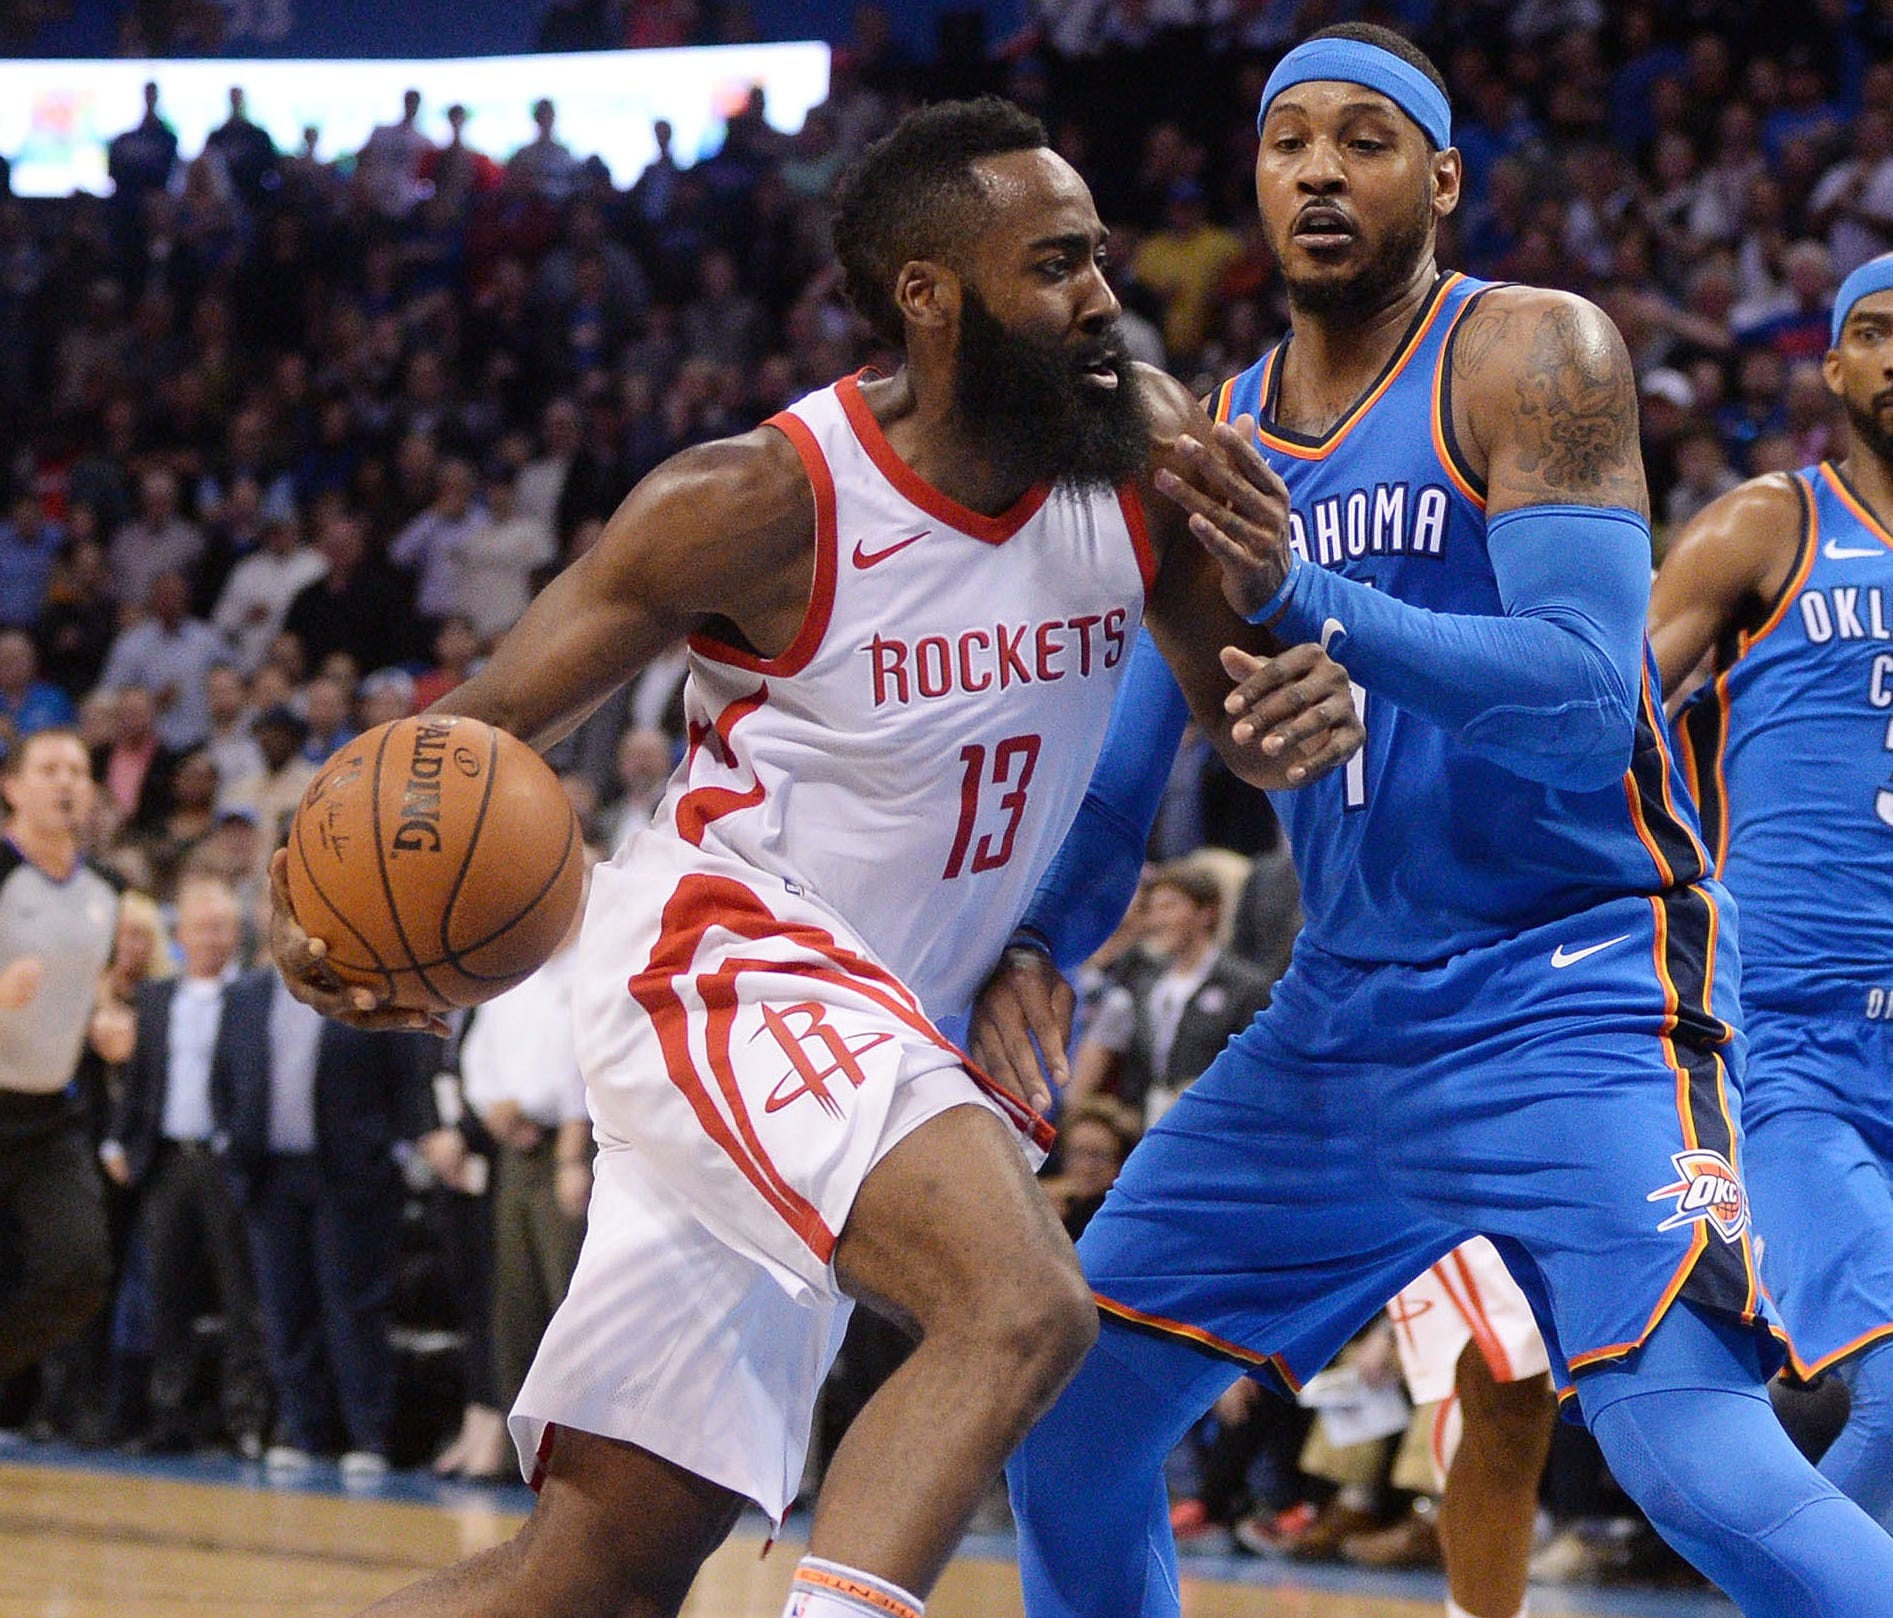 James Harden had 23 points and 11 assists for the Rockets to beat Carmelo Anthony and the Thunder.